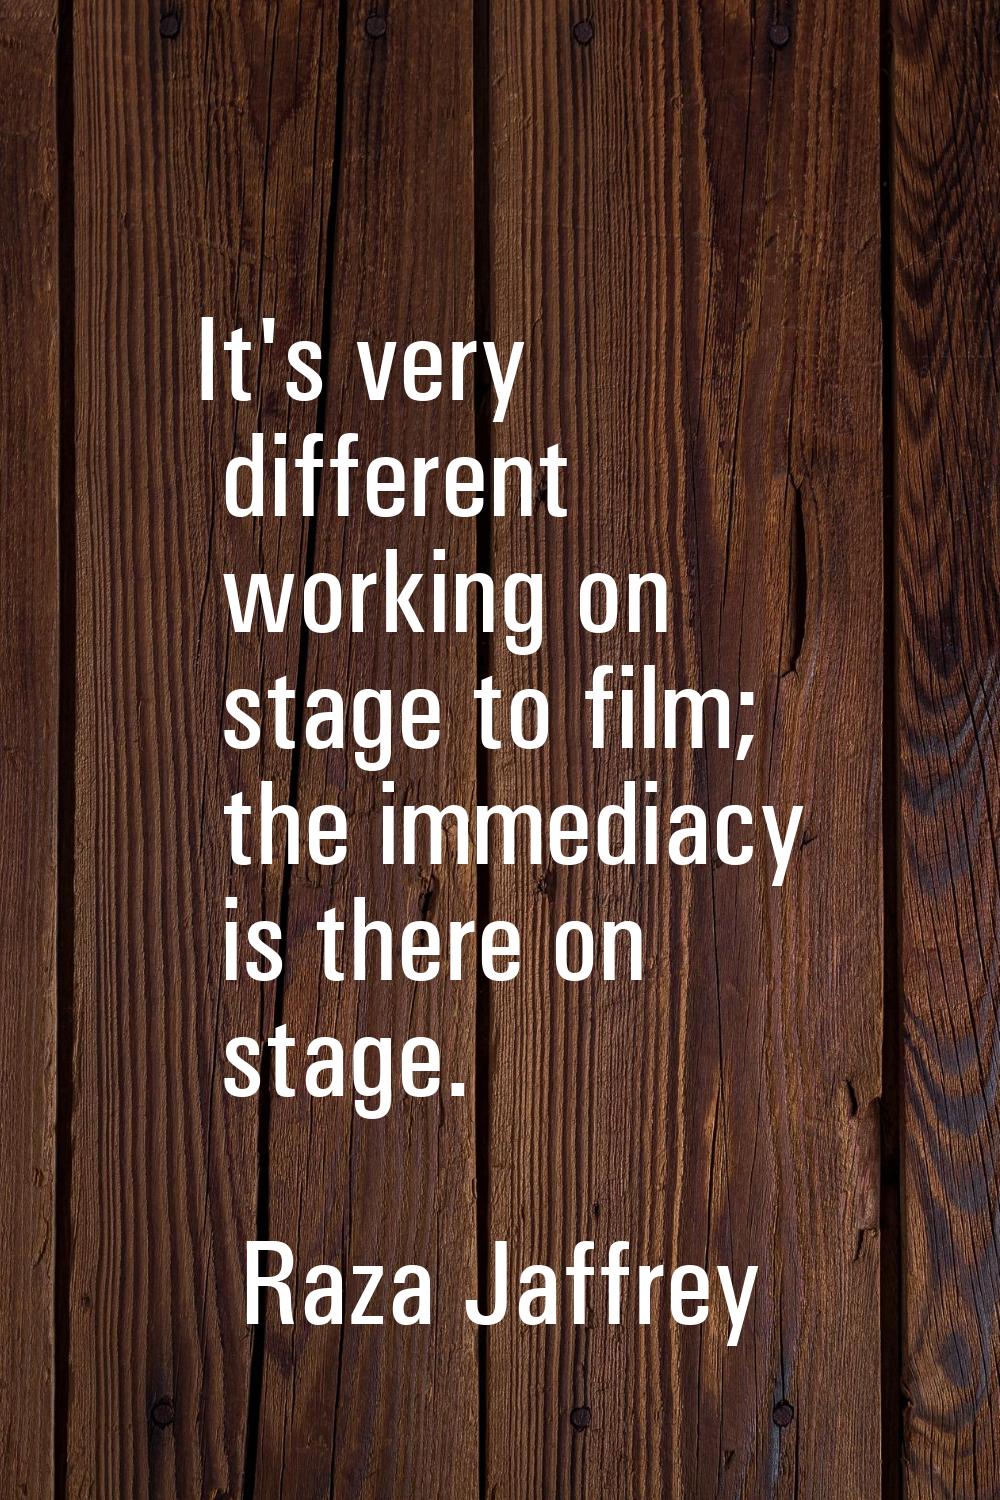 It's very different working on stage to film; the immediacy is there on stage.